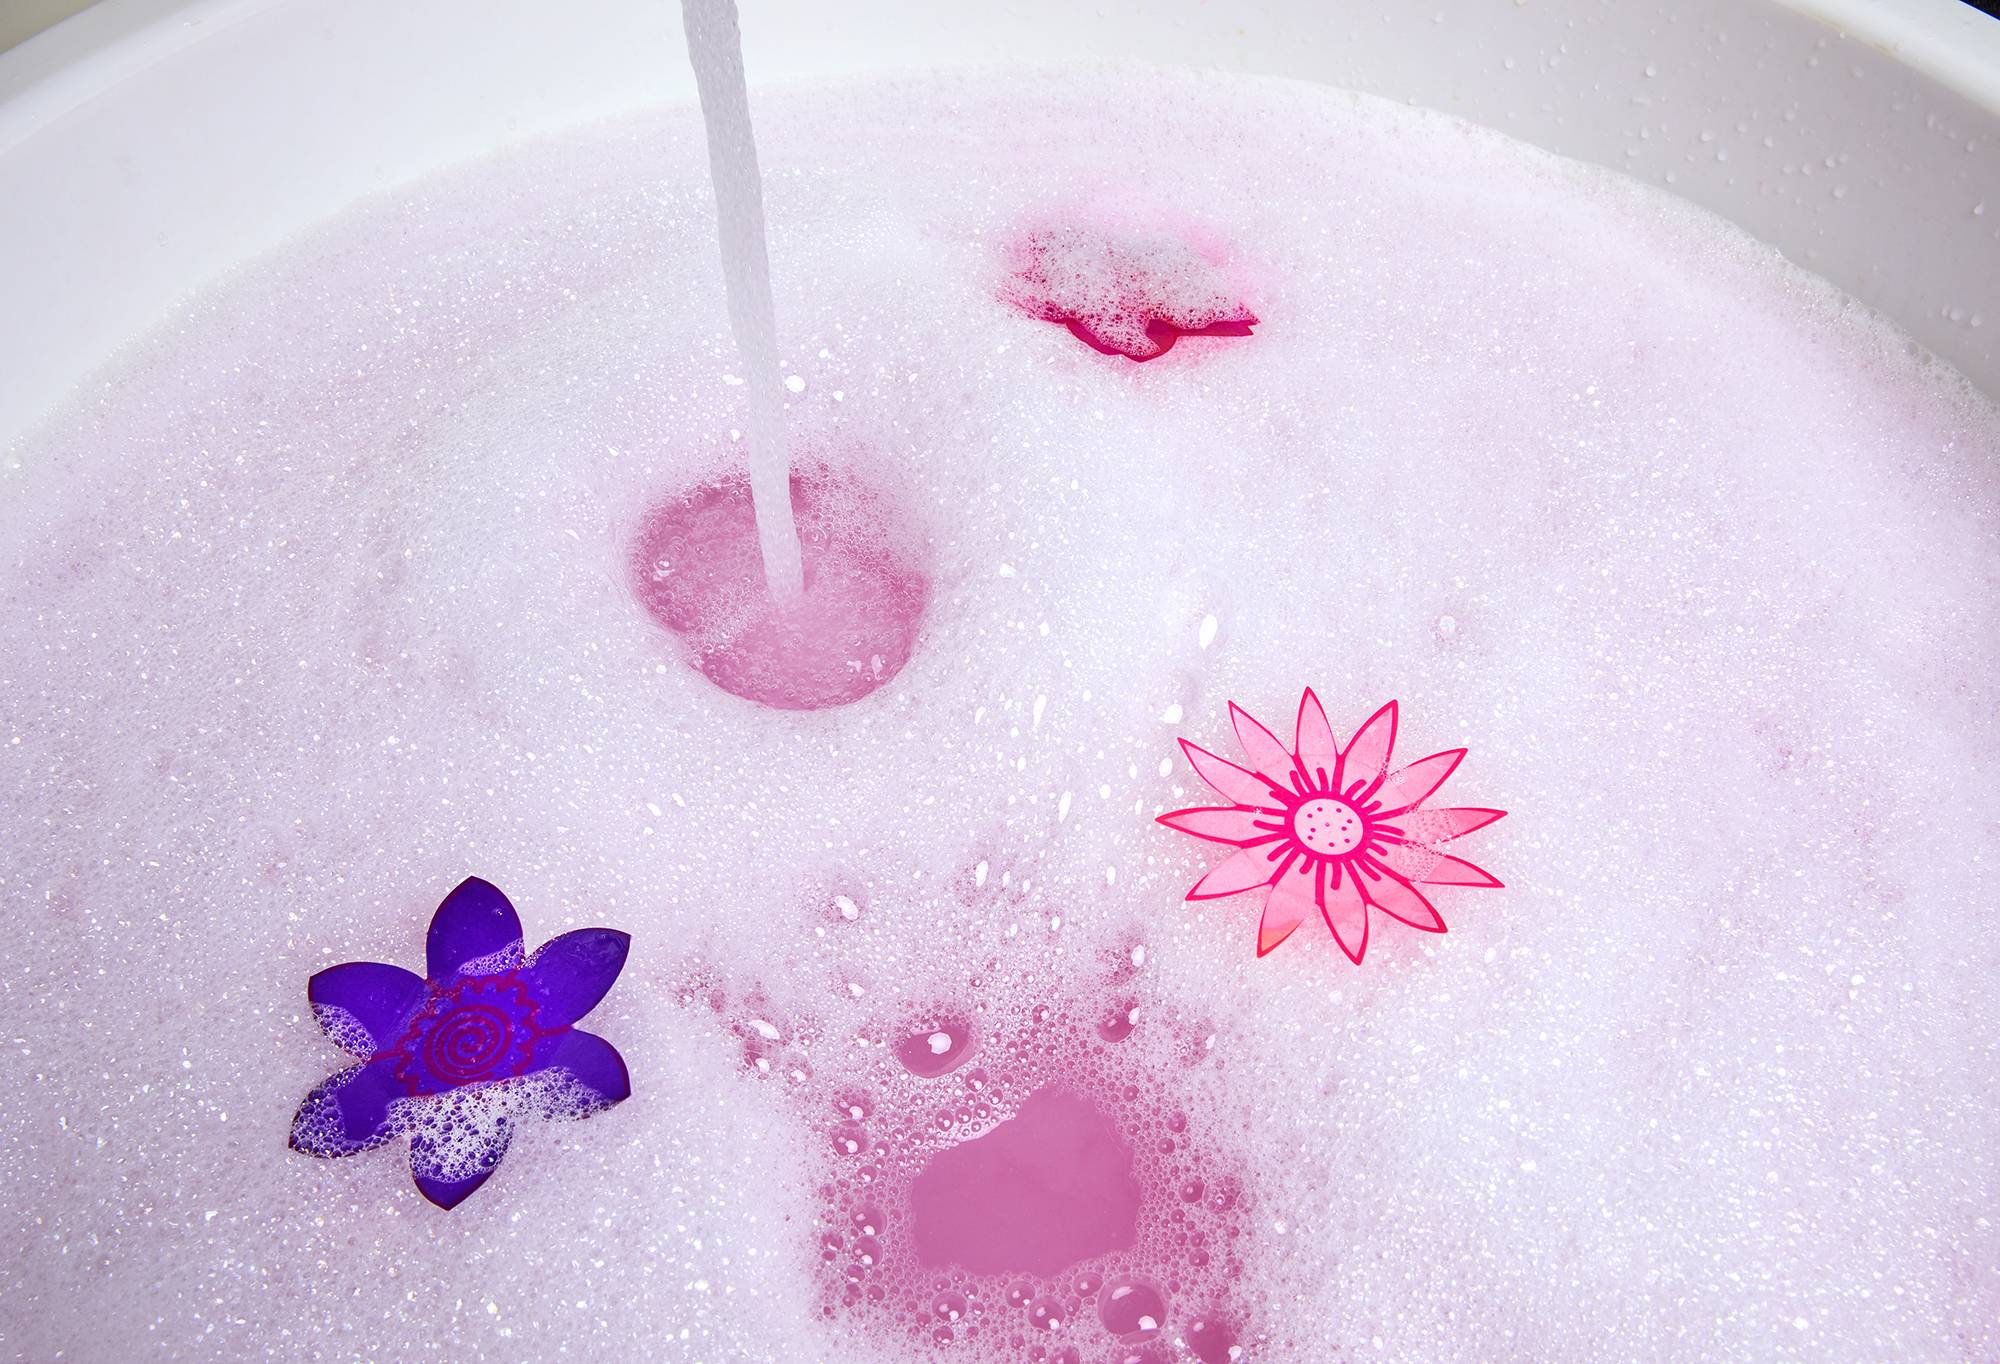 Image shows a bath full of pale pink water, covered in foamy bubbles with the paper flowers floating atop.